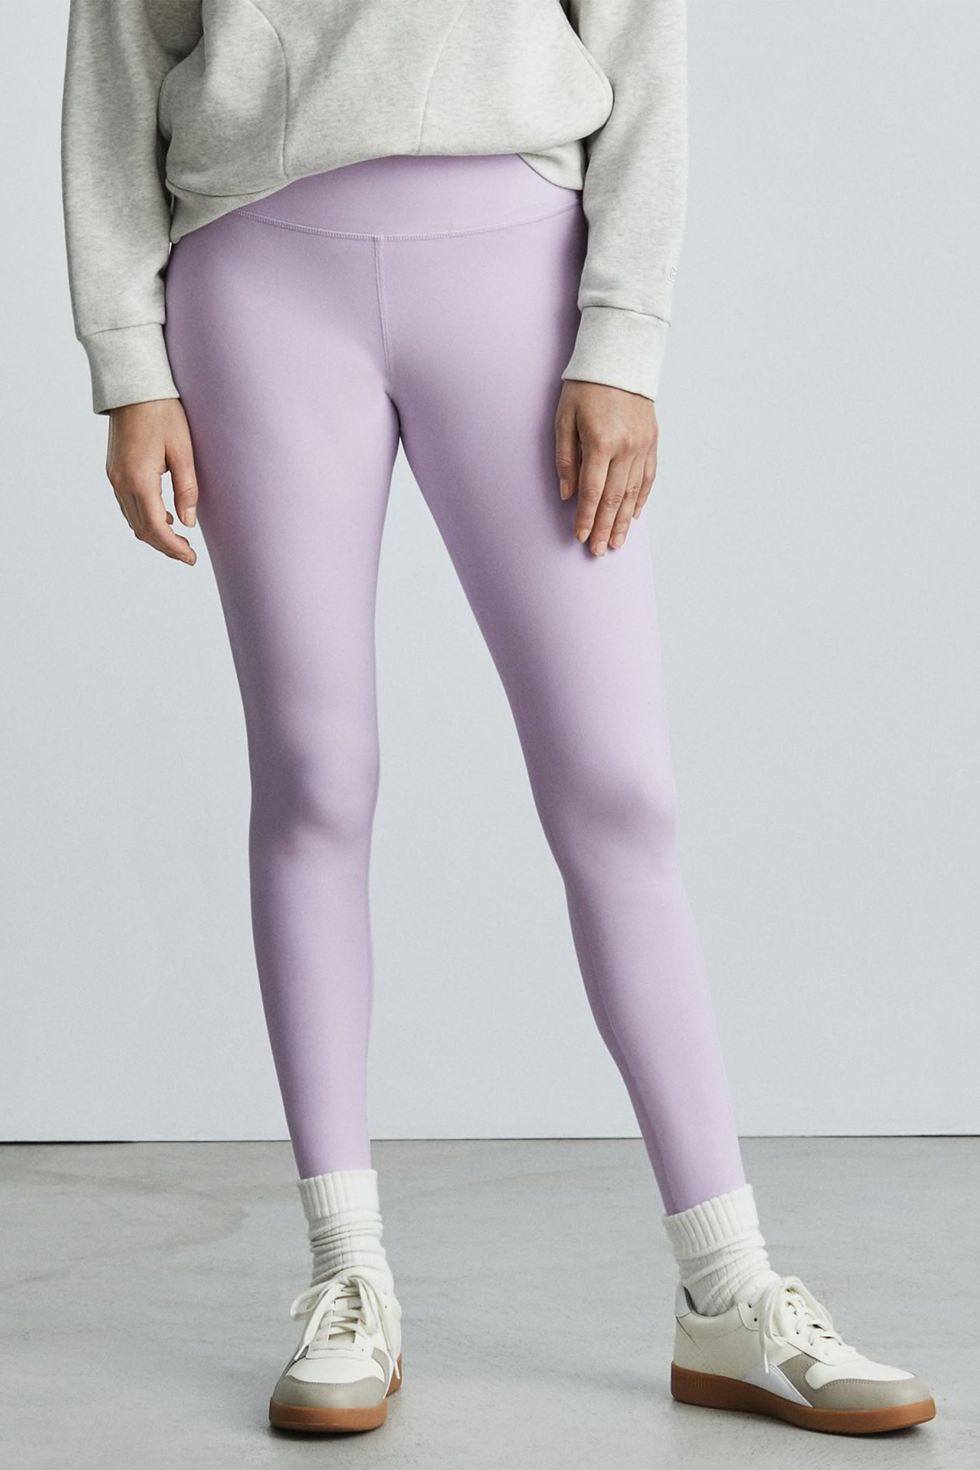 This Legging That Sold Out In A Record 27 Minutes Will Soon Be Restocked! -  VITA Daily